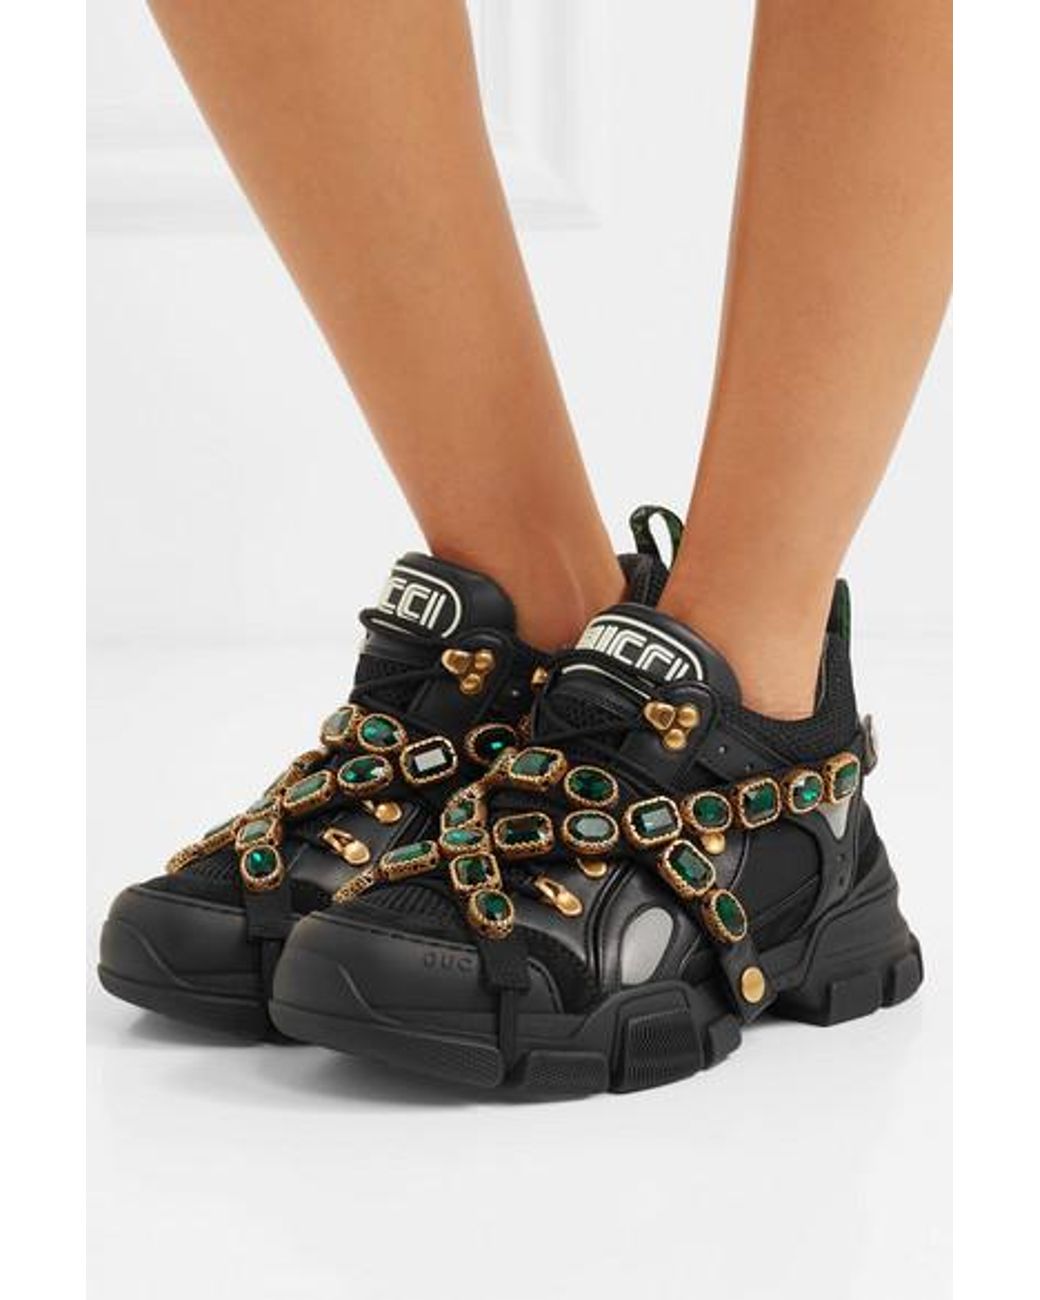 Gucci Flashtrek Sneakers With Removable Crystals in Black | Lyst